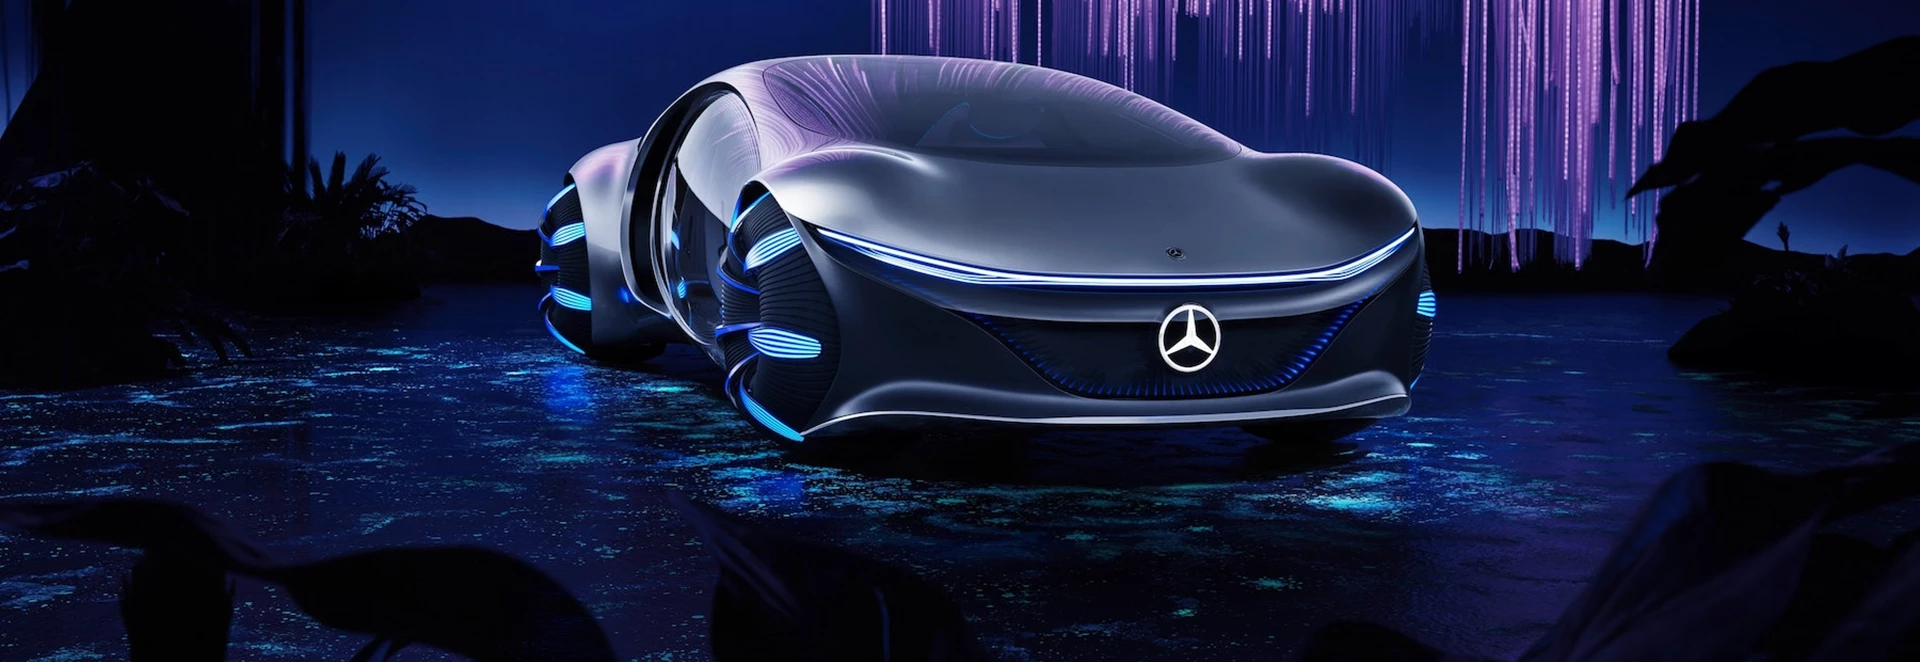 The top 6 automotive debuts at CES 2020 